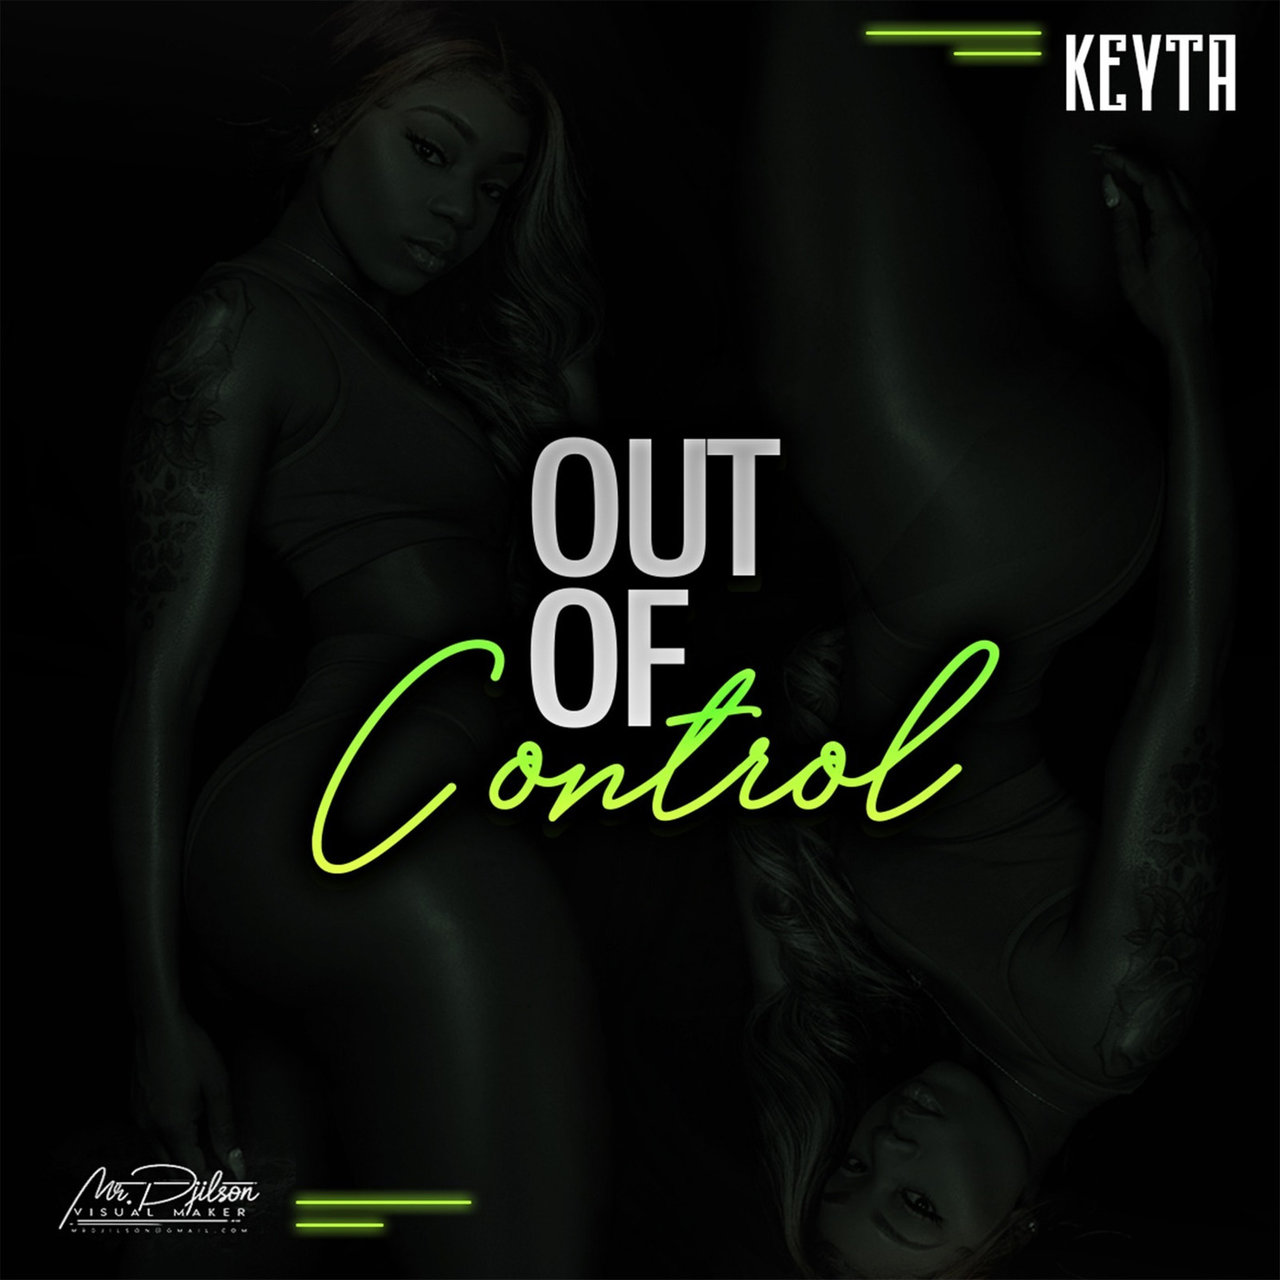 Keyta - Out Of Control (Cover)